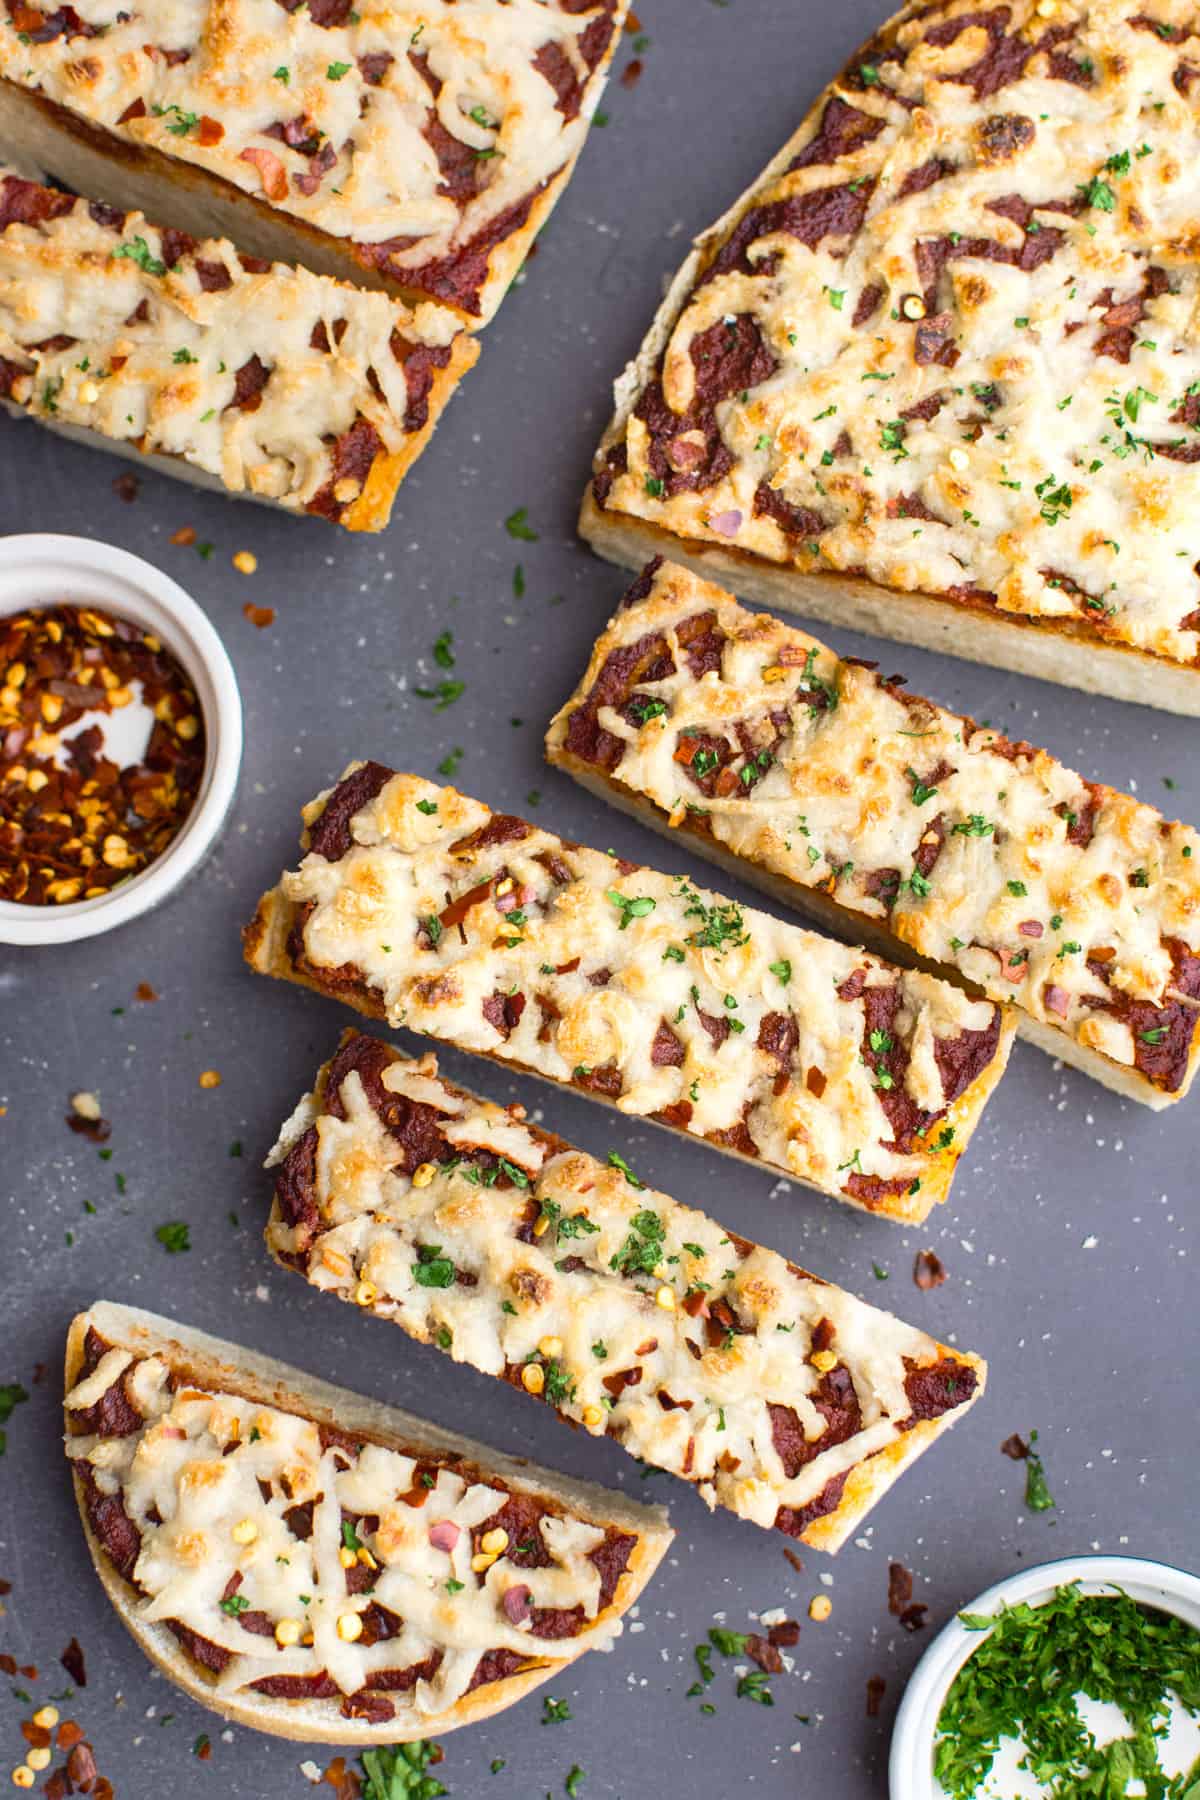 Vegan French bread cheese pizza cut into 2-inch slices.